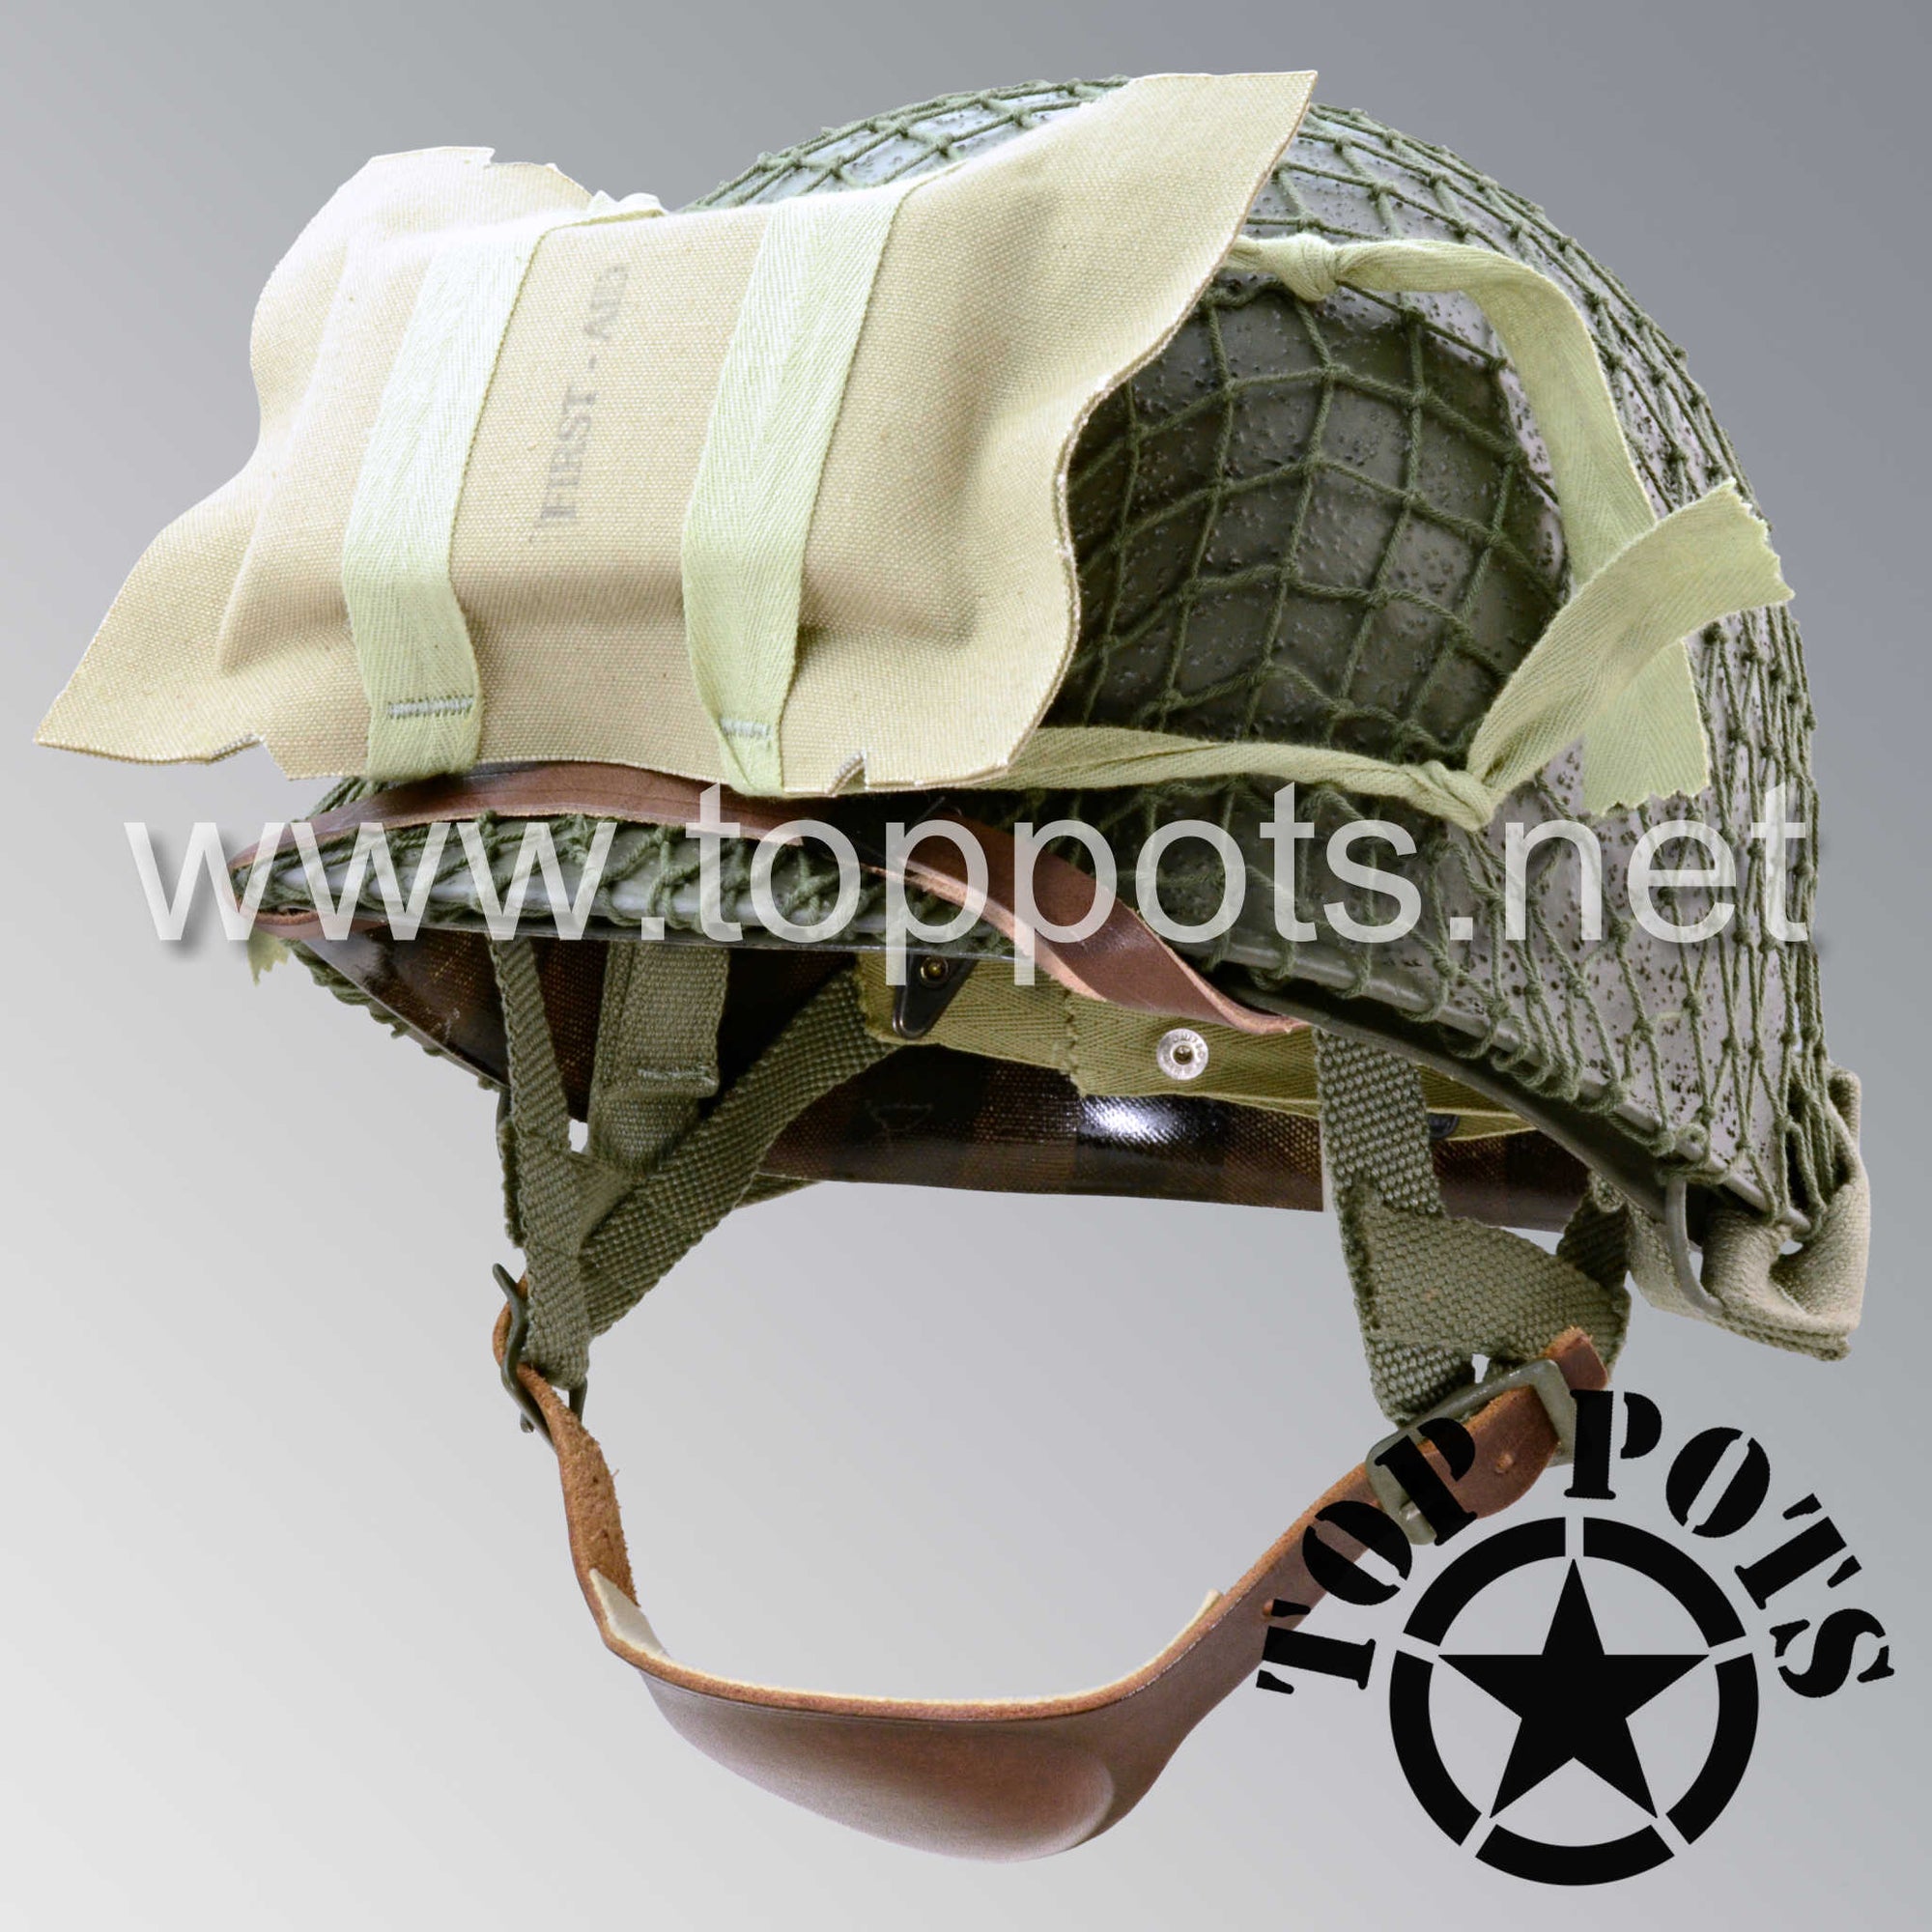 WWII US Army Restored Original M2 Paratrooper Airborne Helmet D Bale Shell and Liner with OD 7 Net and Medic Pack